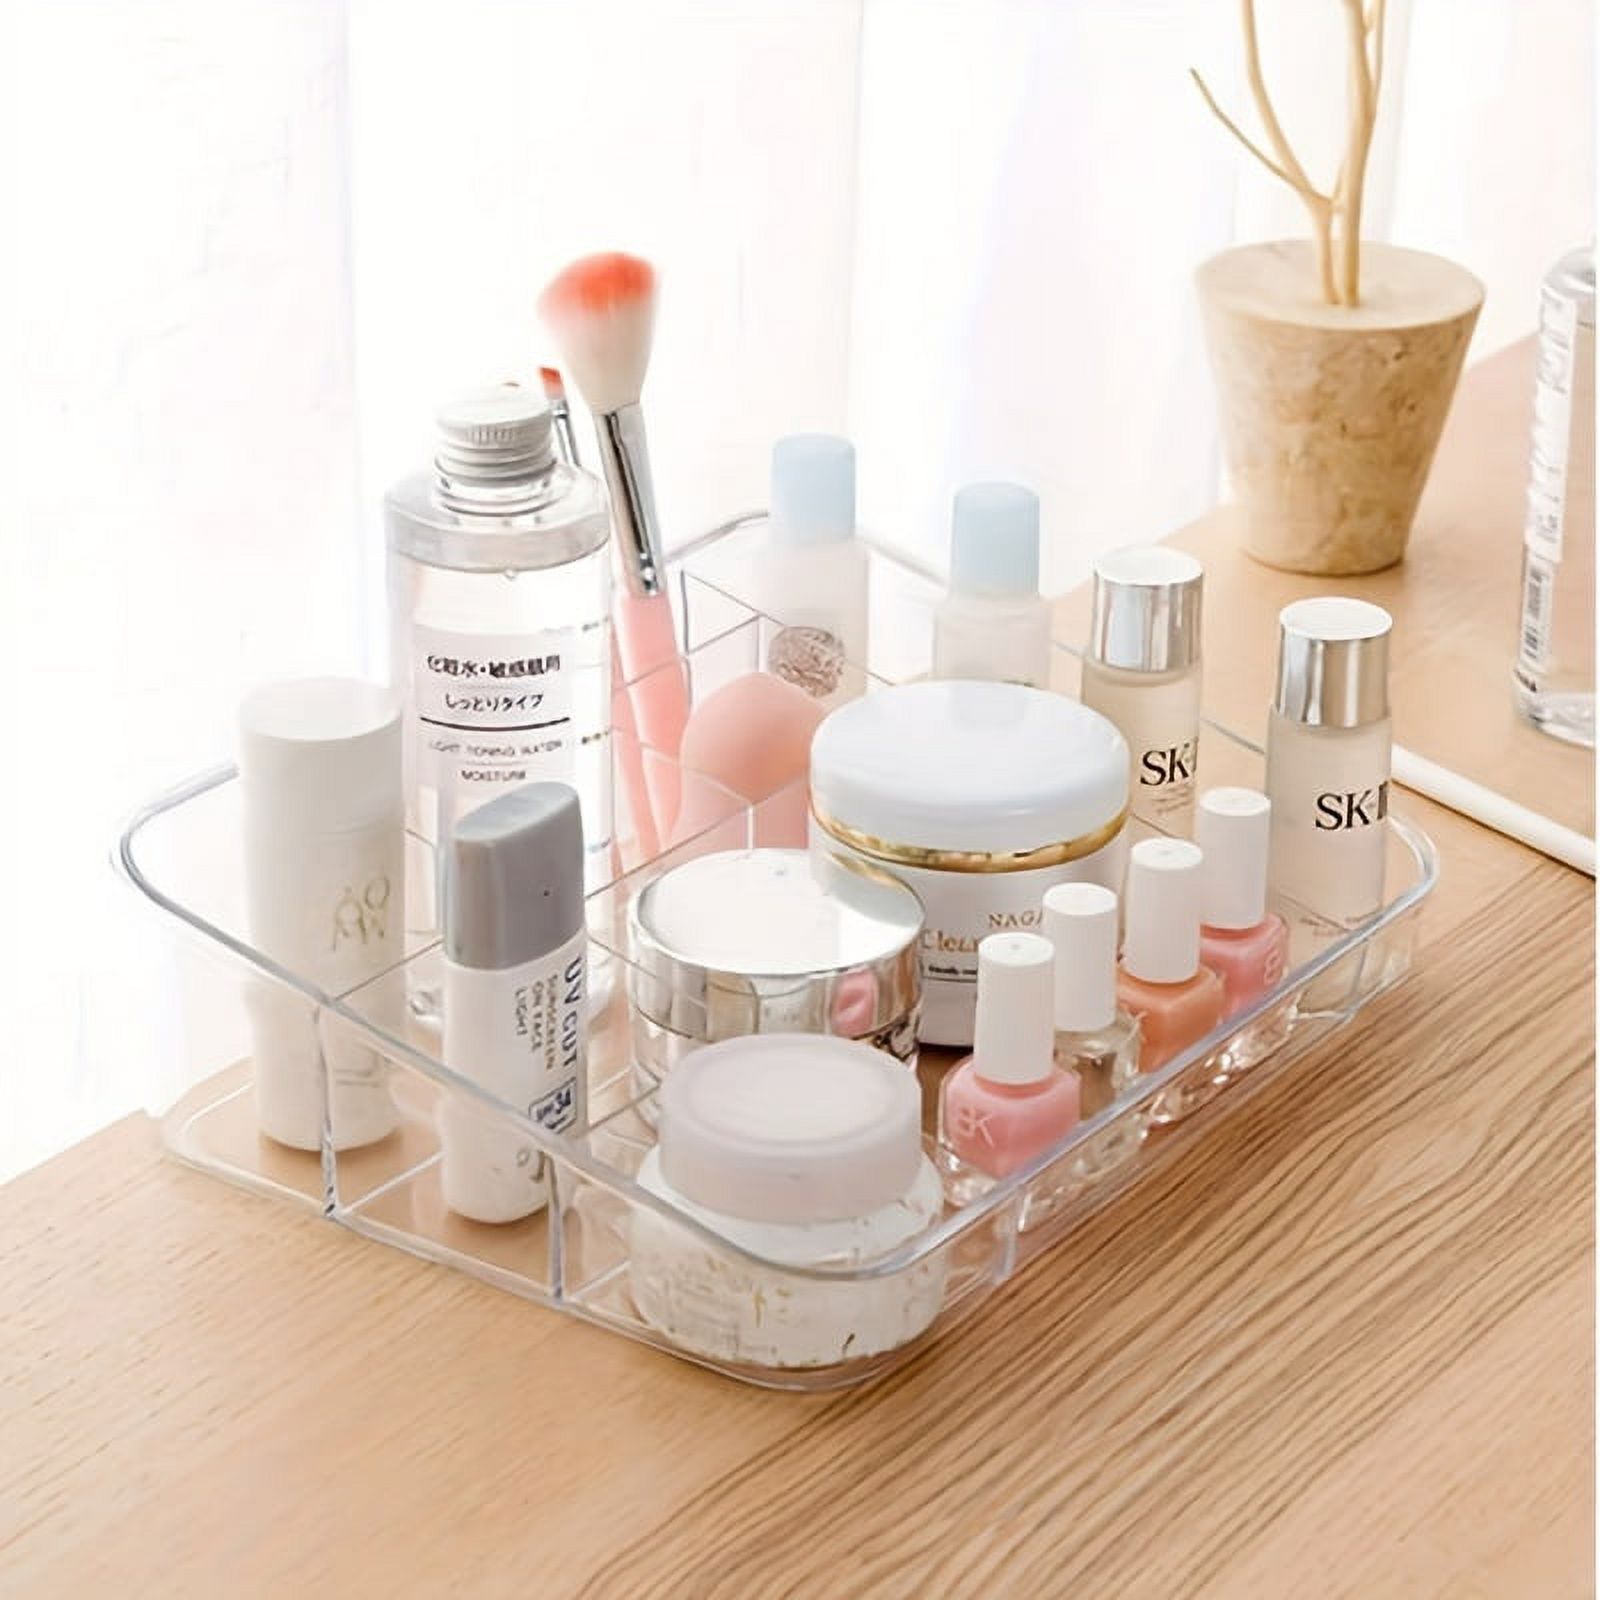 SUNFICON Makeup Organizer Tray Brush Holder Cosmetic Display Case Storage Box for Vanity Countertop Bathroom Drawers, 8 Compartments, Crystal Clear Acrylic - image 3 of 9